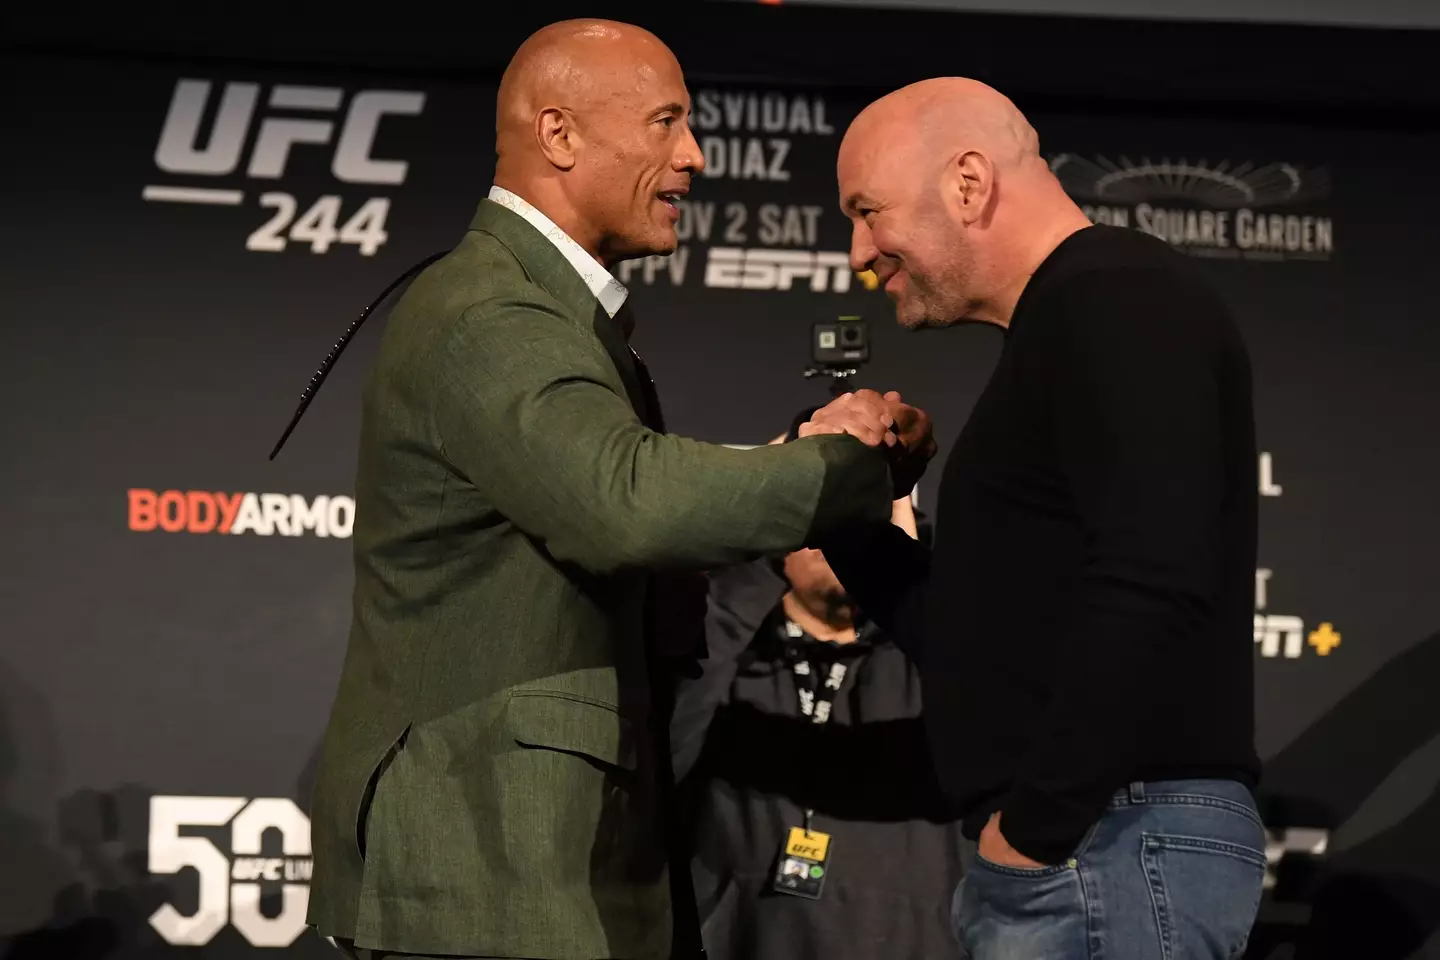 Dwayne Johnson and Dana White share an embrace at UFC 244. Image: Getty